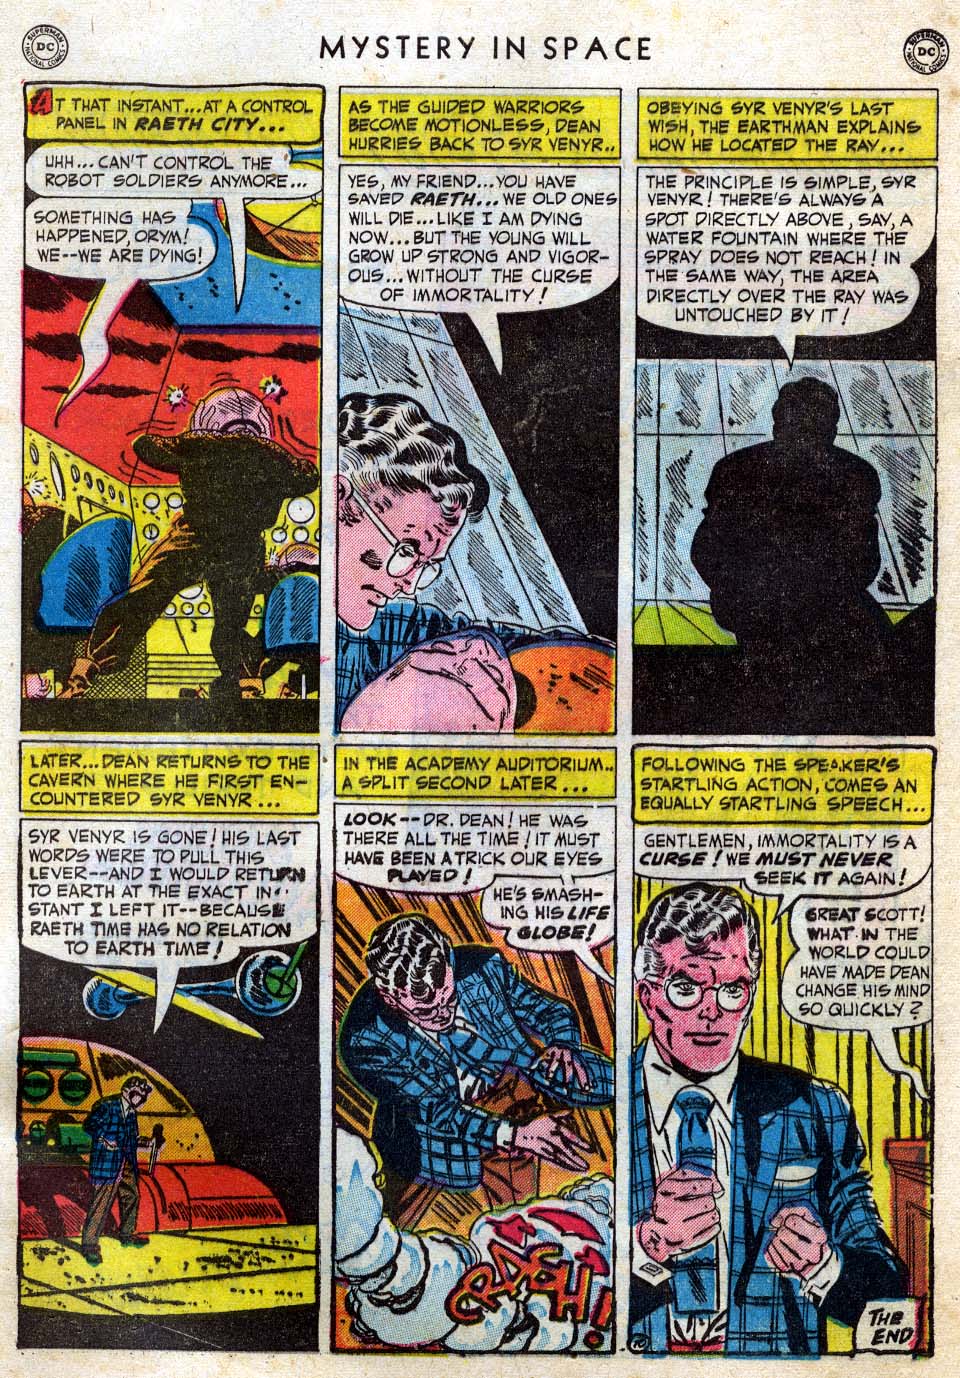 Mystery in Space (1951) 1 Page 48